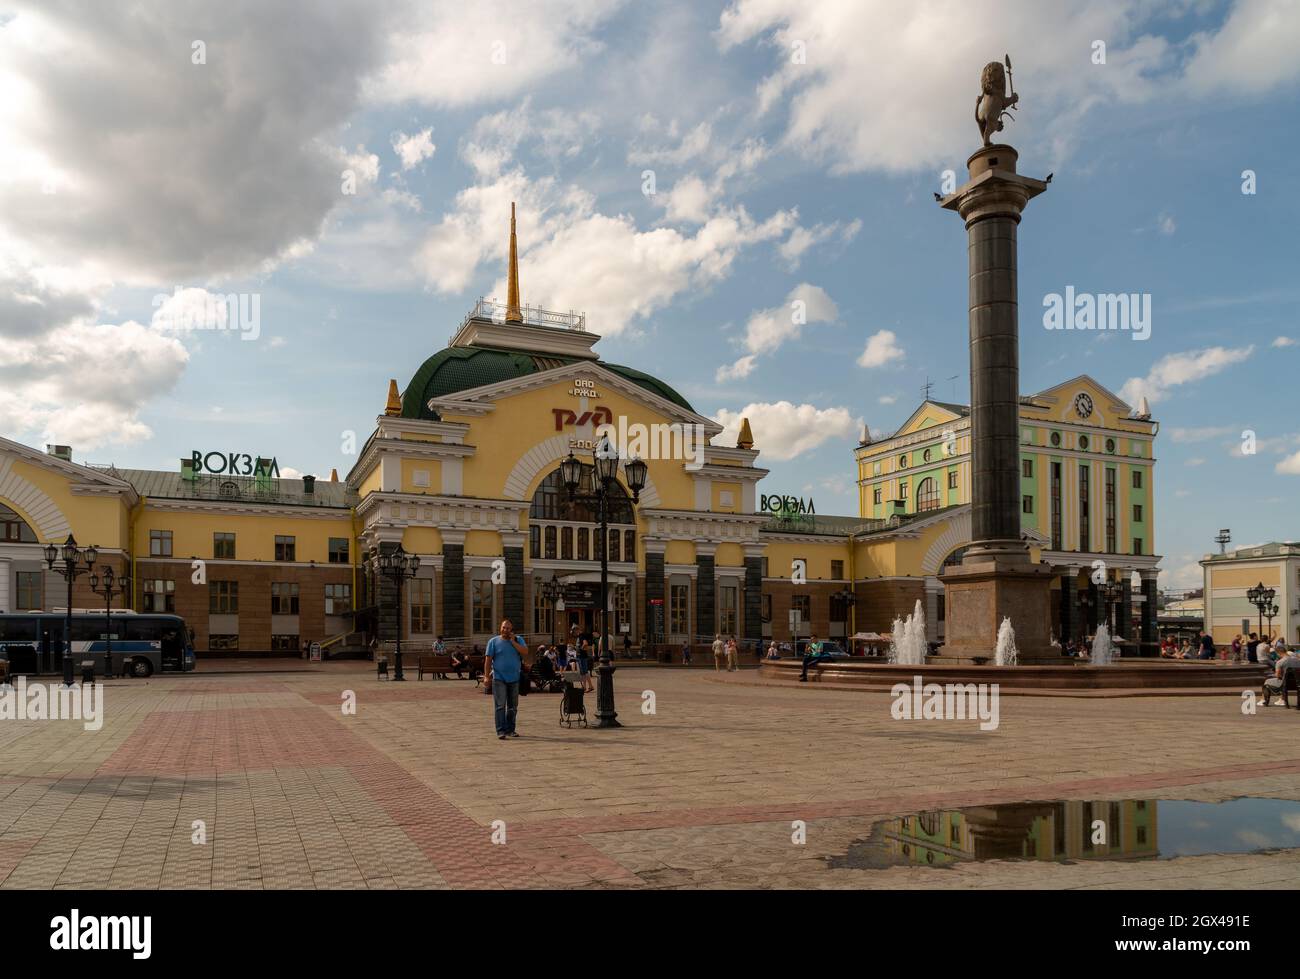 The main railway station of the city and the station square with people in front of it on a summer day. Stock Photo